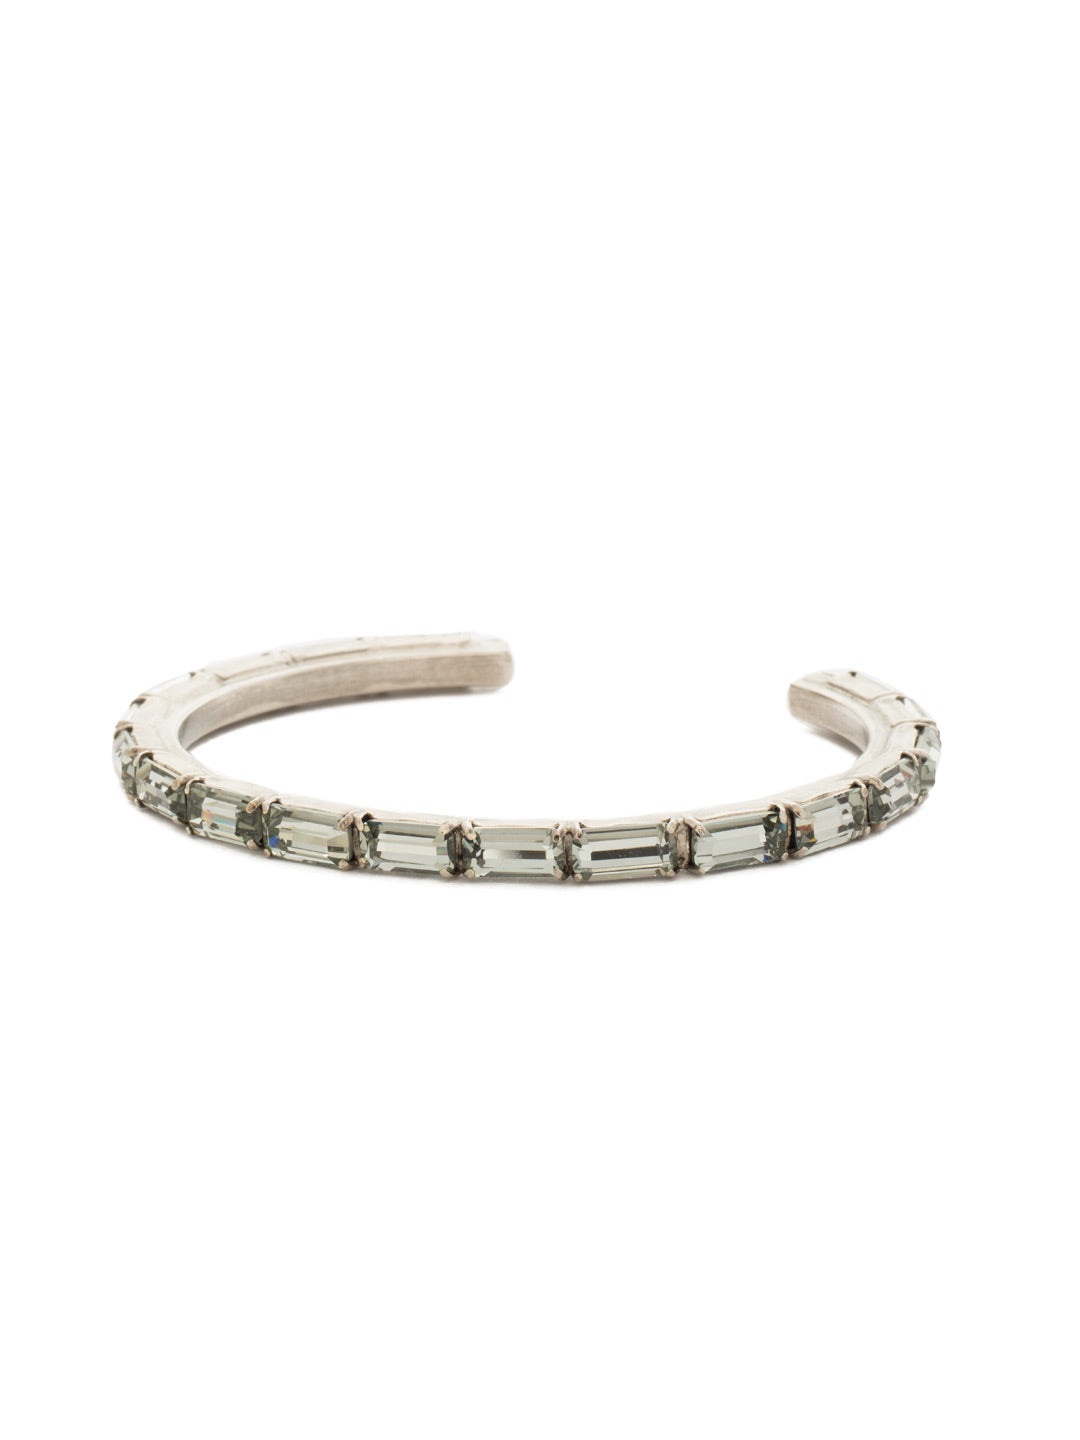 Brilliant Baguette Cuff Bracelet - BDK49ASBD - This cuff bracelet features repeating crystal baguettes and can be mixed and matched in a myriad of ways. From Sorrelli's Black Diamond collection in our Antique Silver-tone finish.